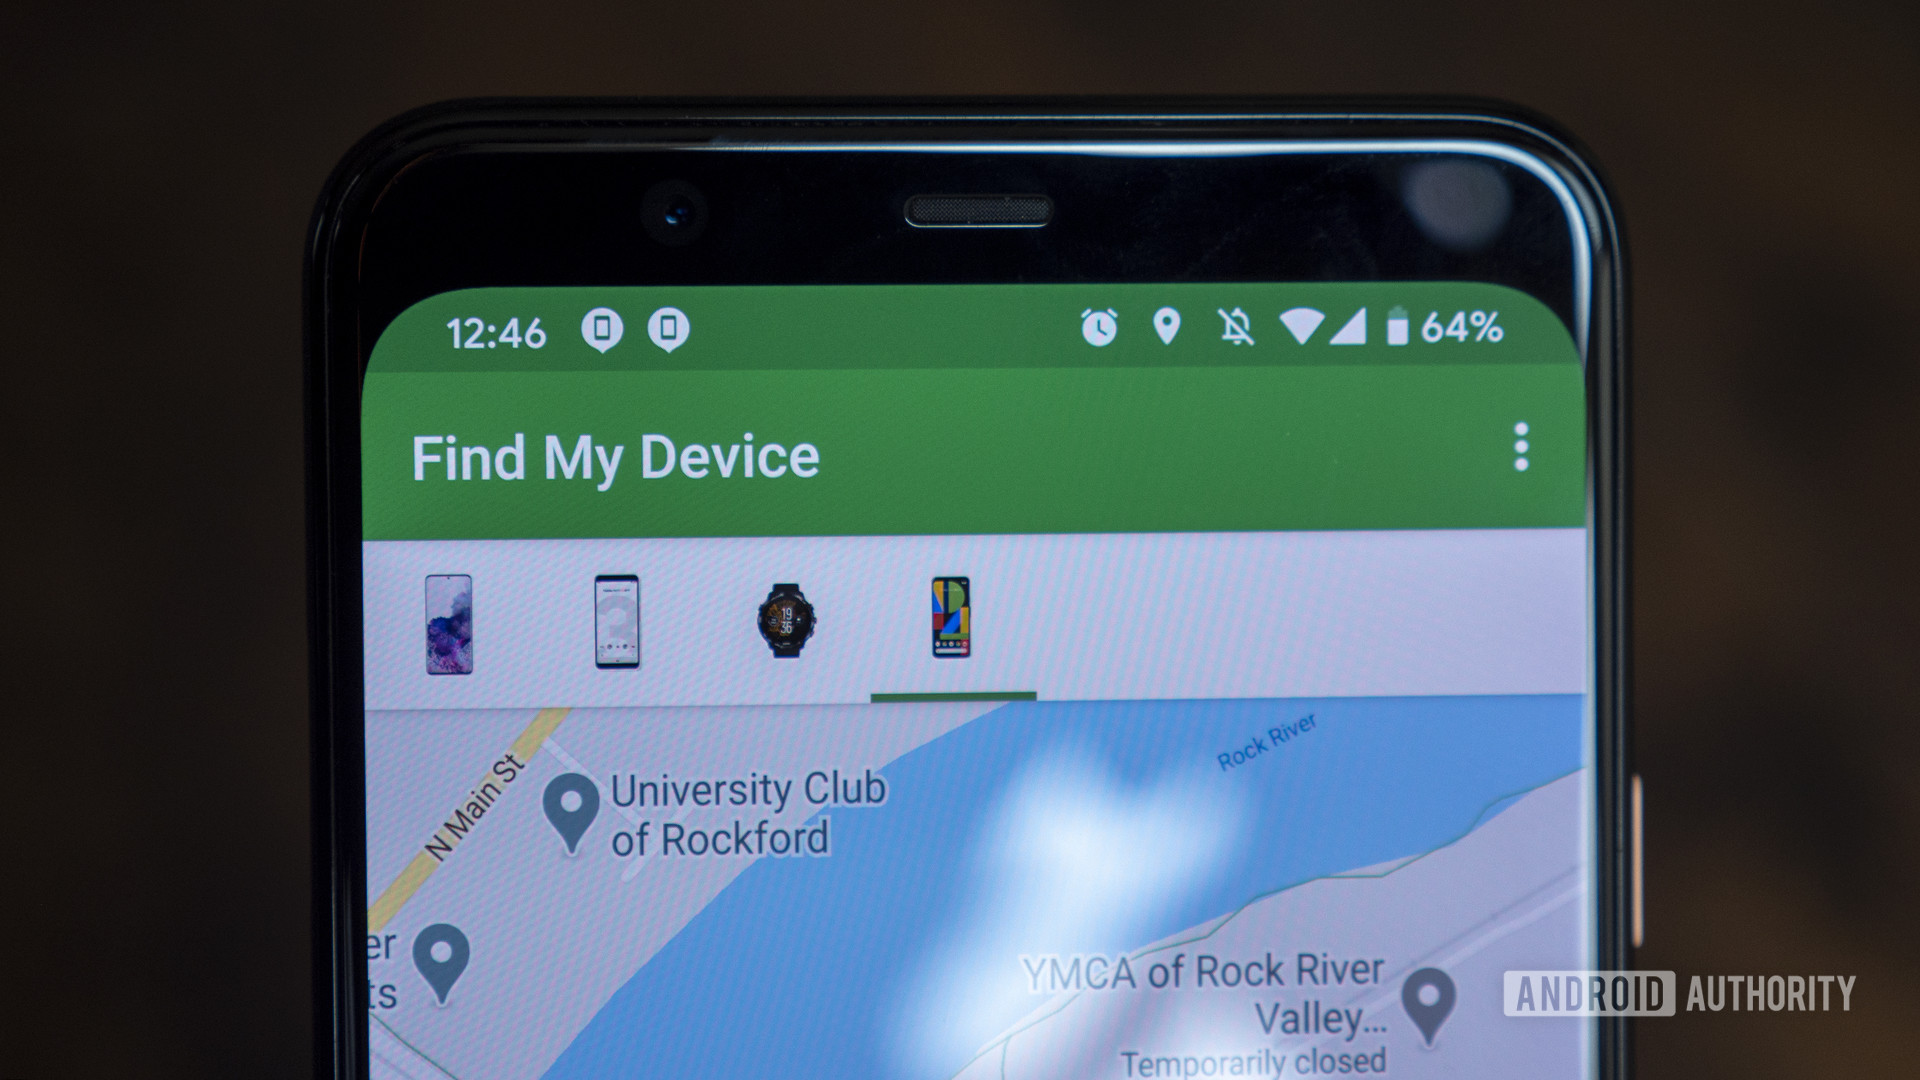 How to find a lost phone, find my device google pixel 4 xl app